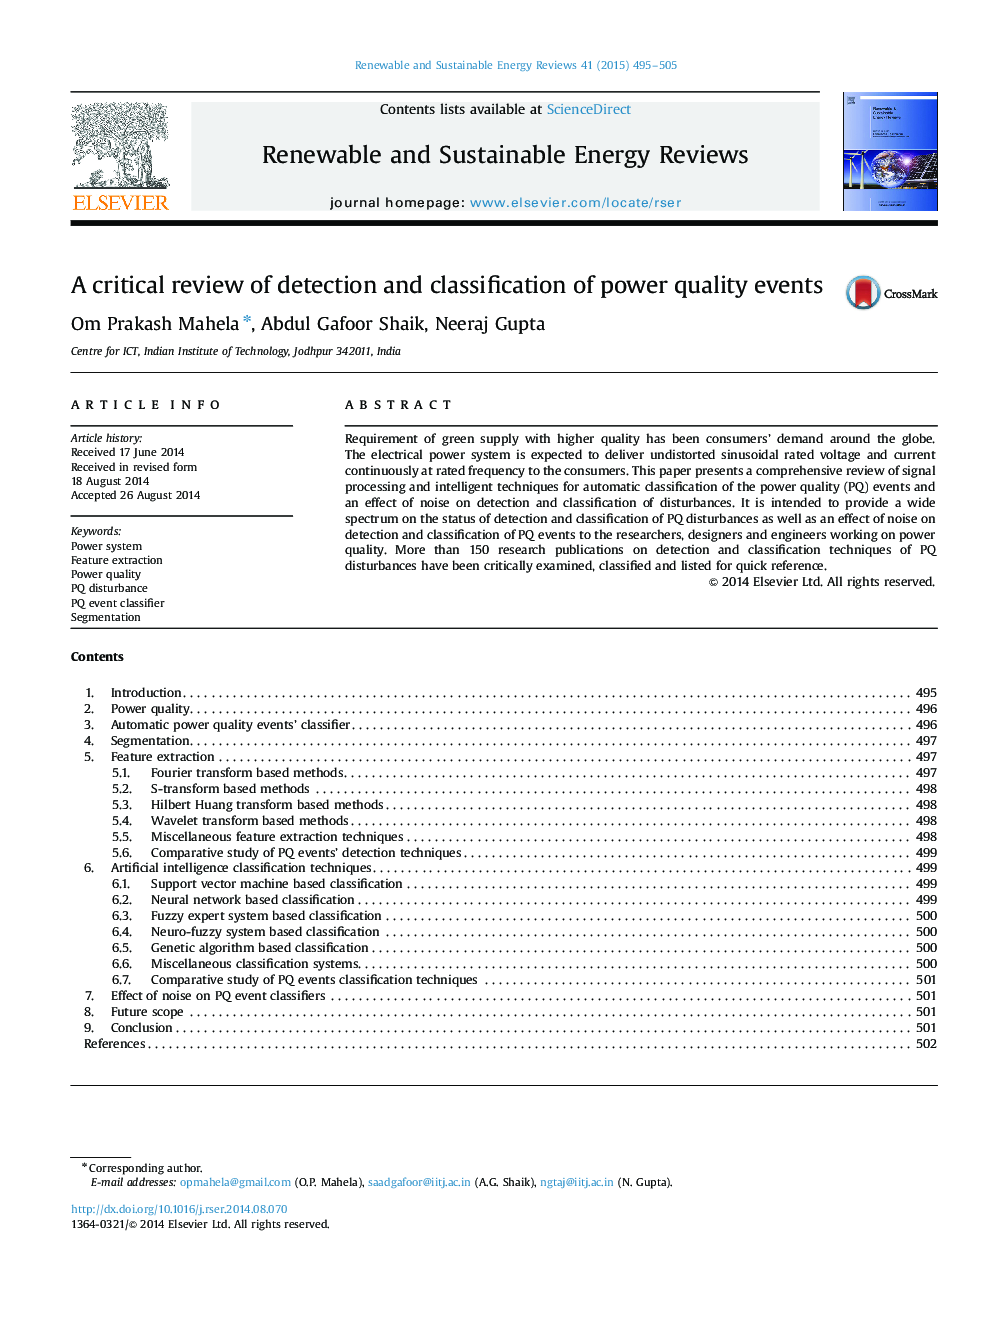 A critical review of detection and classification of power quality events